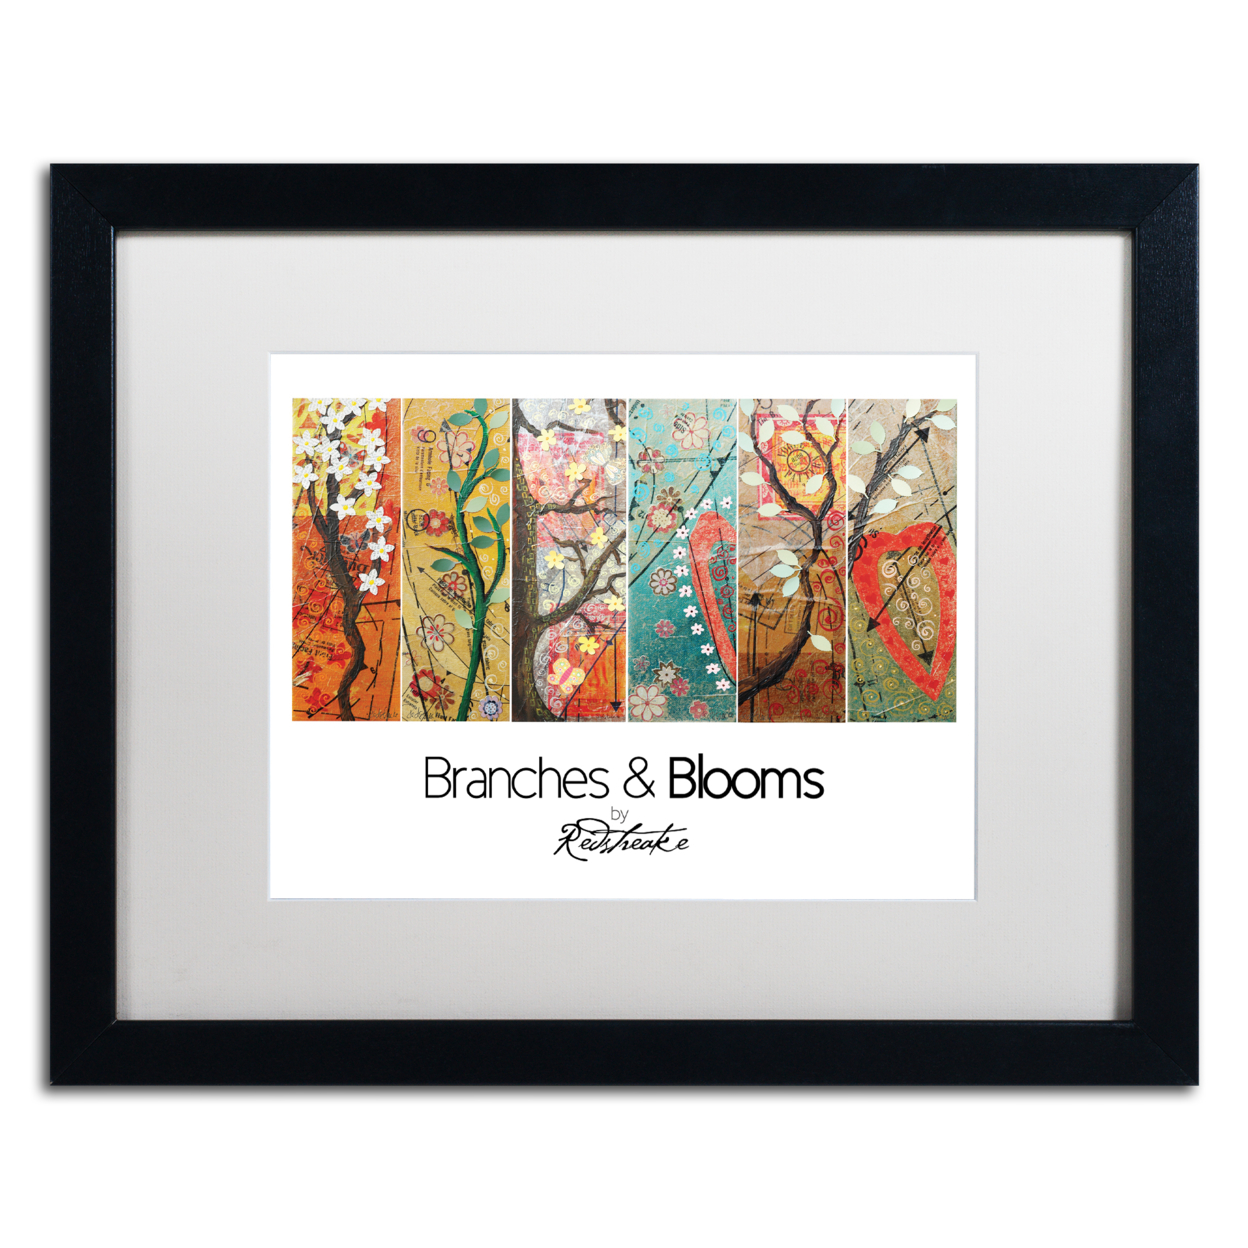 Jennifer Redstreake 'Branches And Blooms' Black Wooden Framed Art 18 X 22 Inches